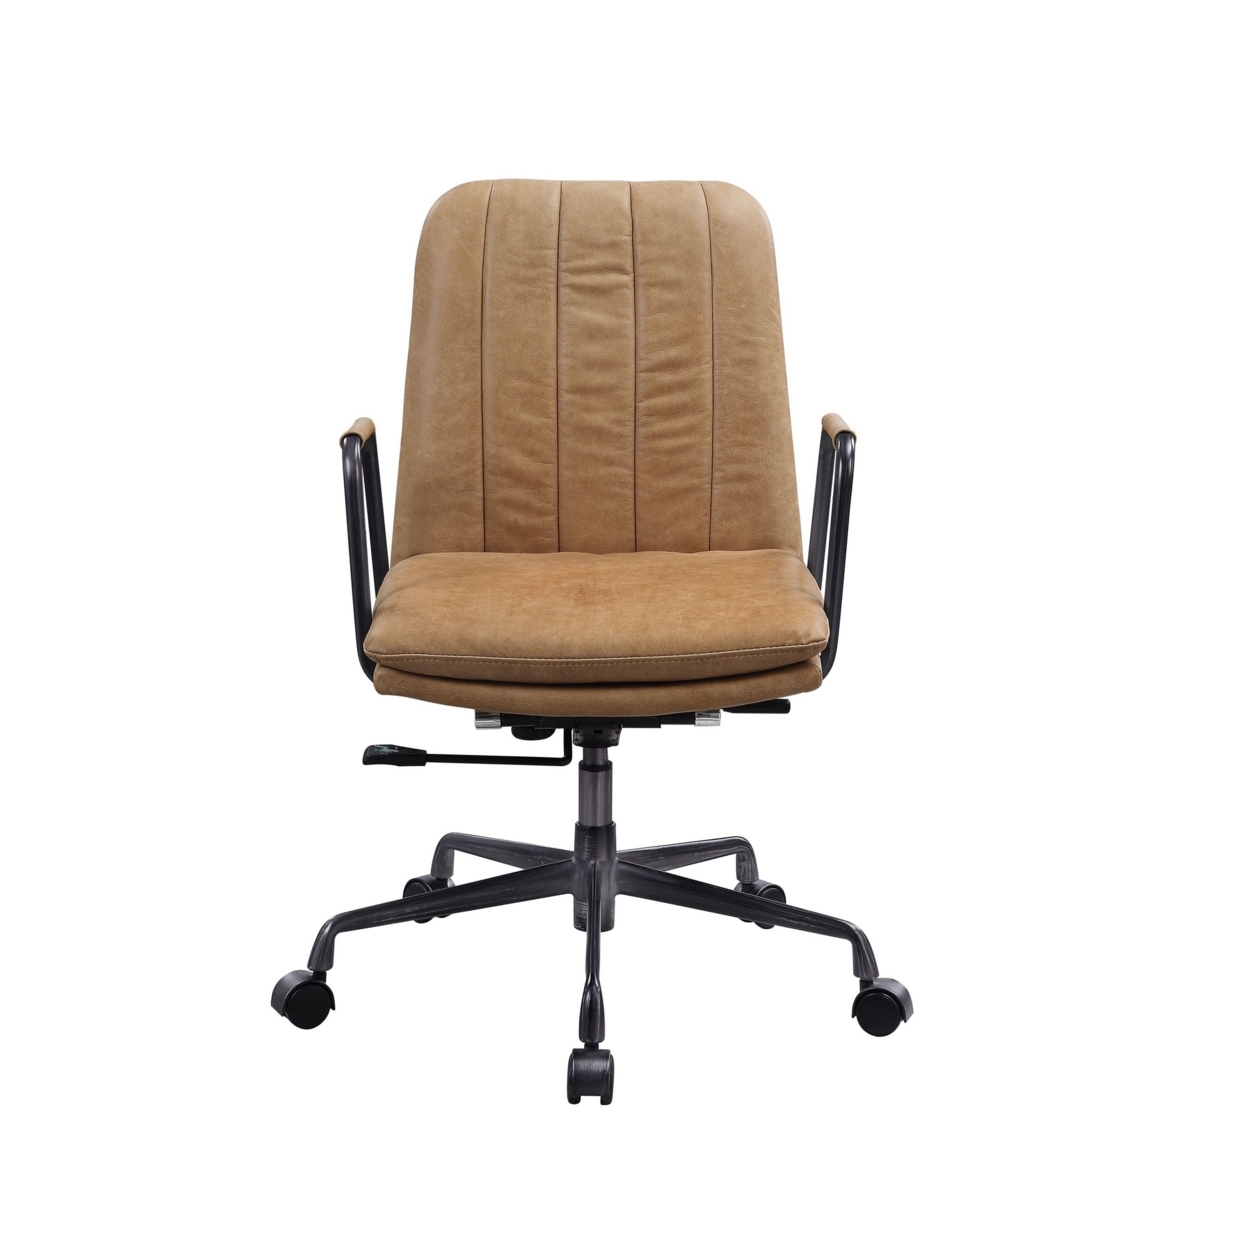 Office Chair With Channel Tufting, Rum And Black- Saltoro Sherpi